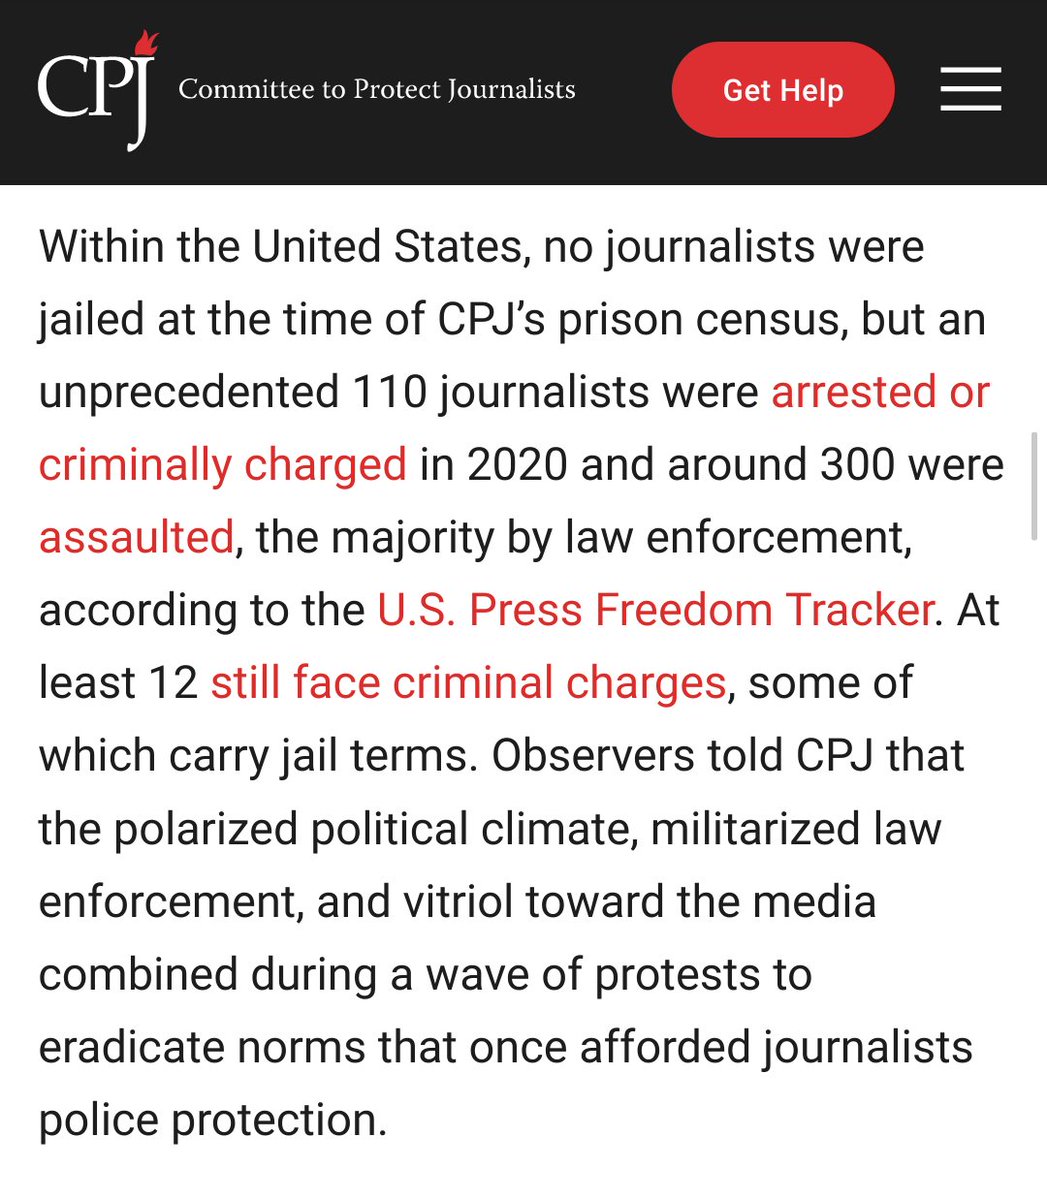 "110 journalists were arrested or criminally charged in 2020 and around 300 were assaulted, the majority by law enforcement, according to the U.S. Press Freedom Tracker.At least 12 still face criminal charges, some of which carry jail terms." https://cpj.org/reports/2020/12/record-number-journalists-jailed-imprisoned/